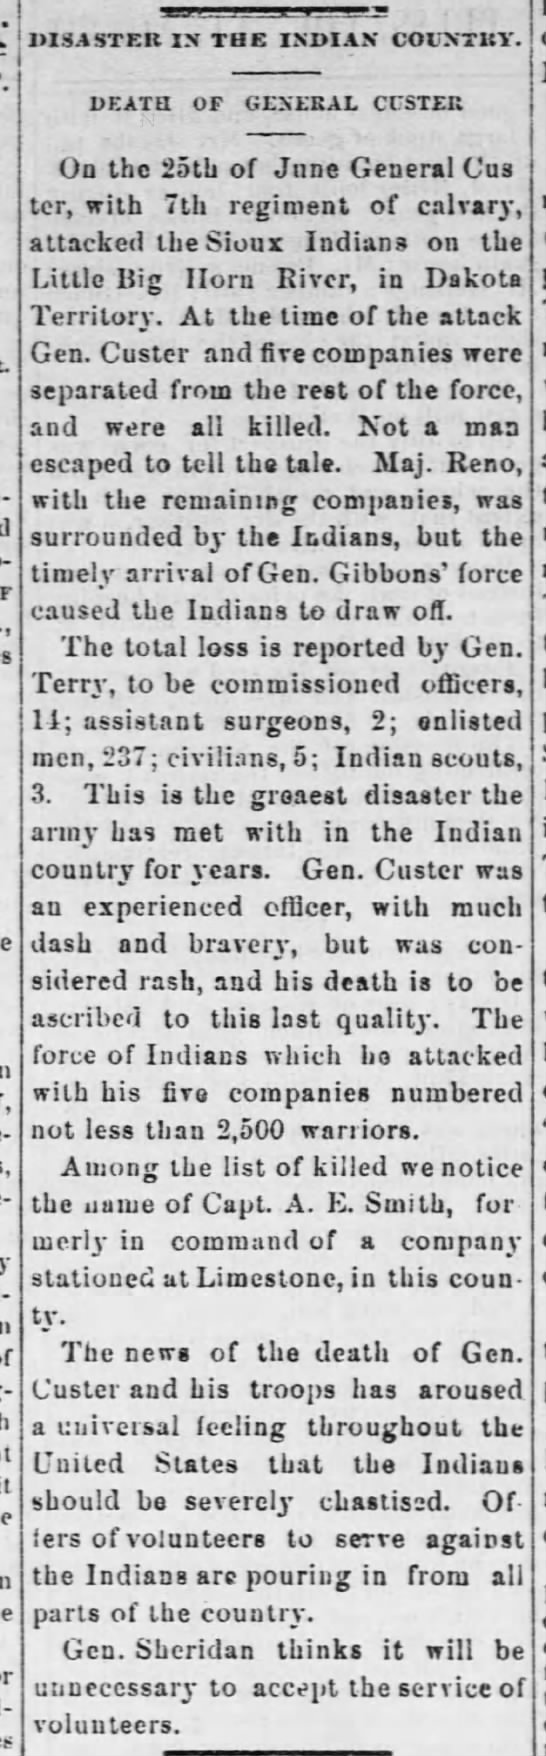 Death of General Custer - 